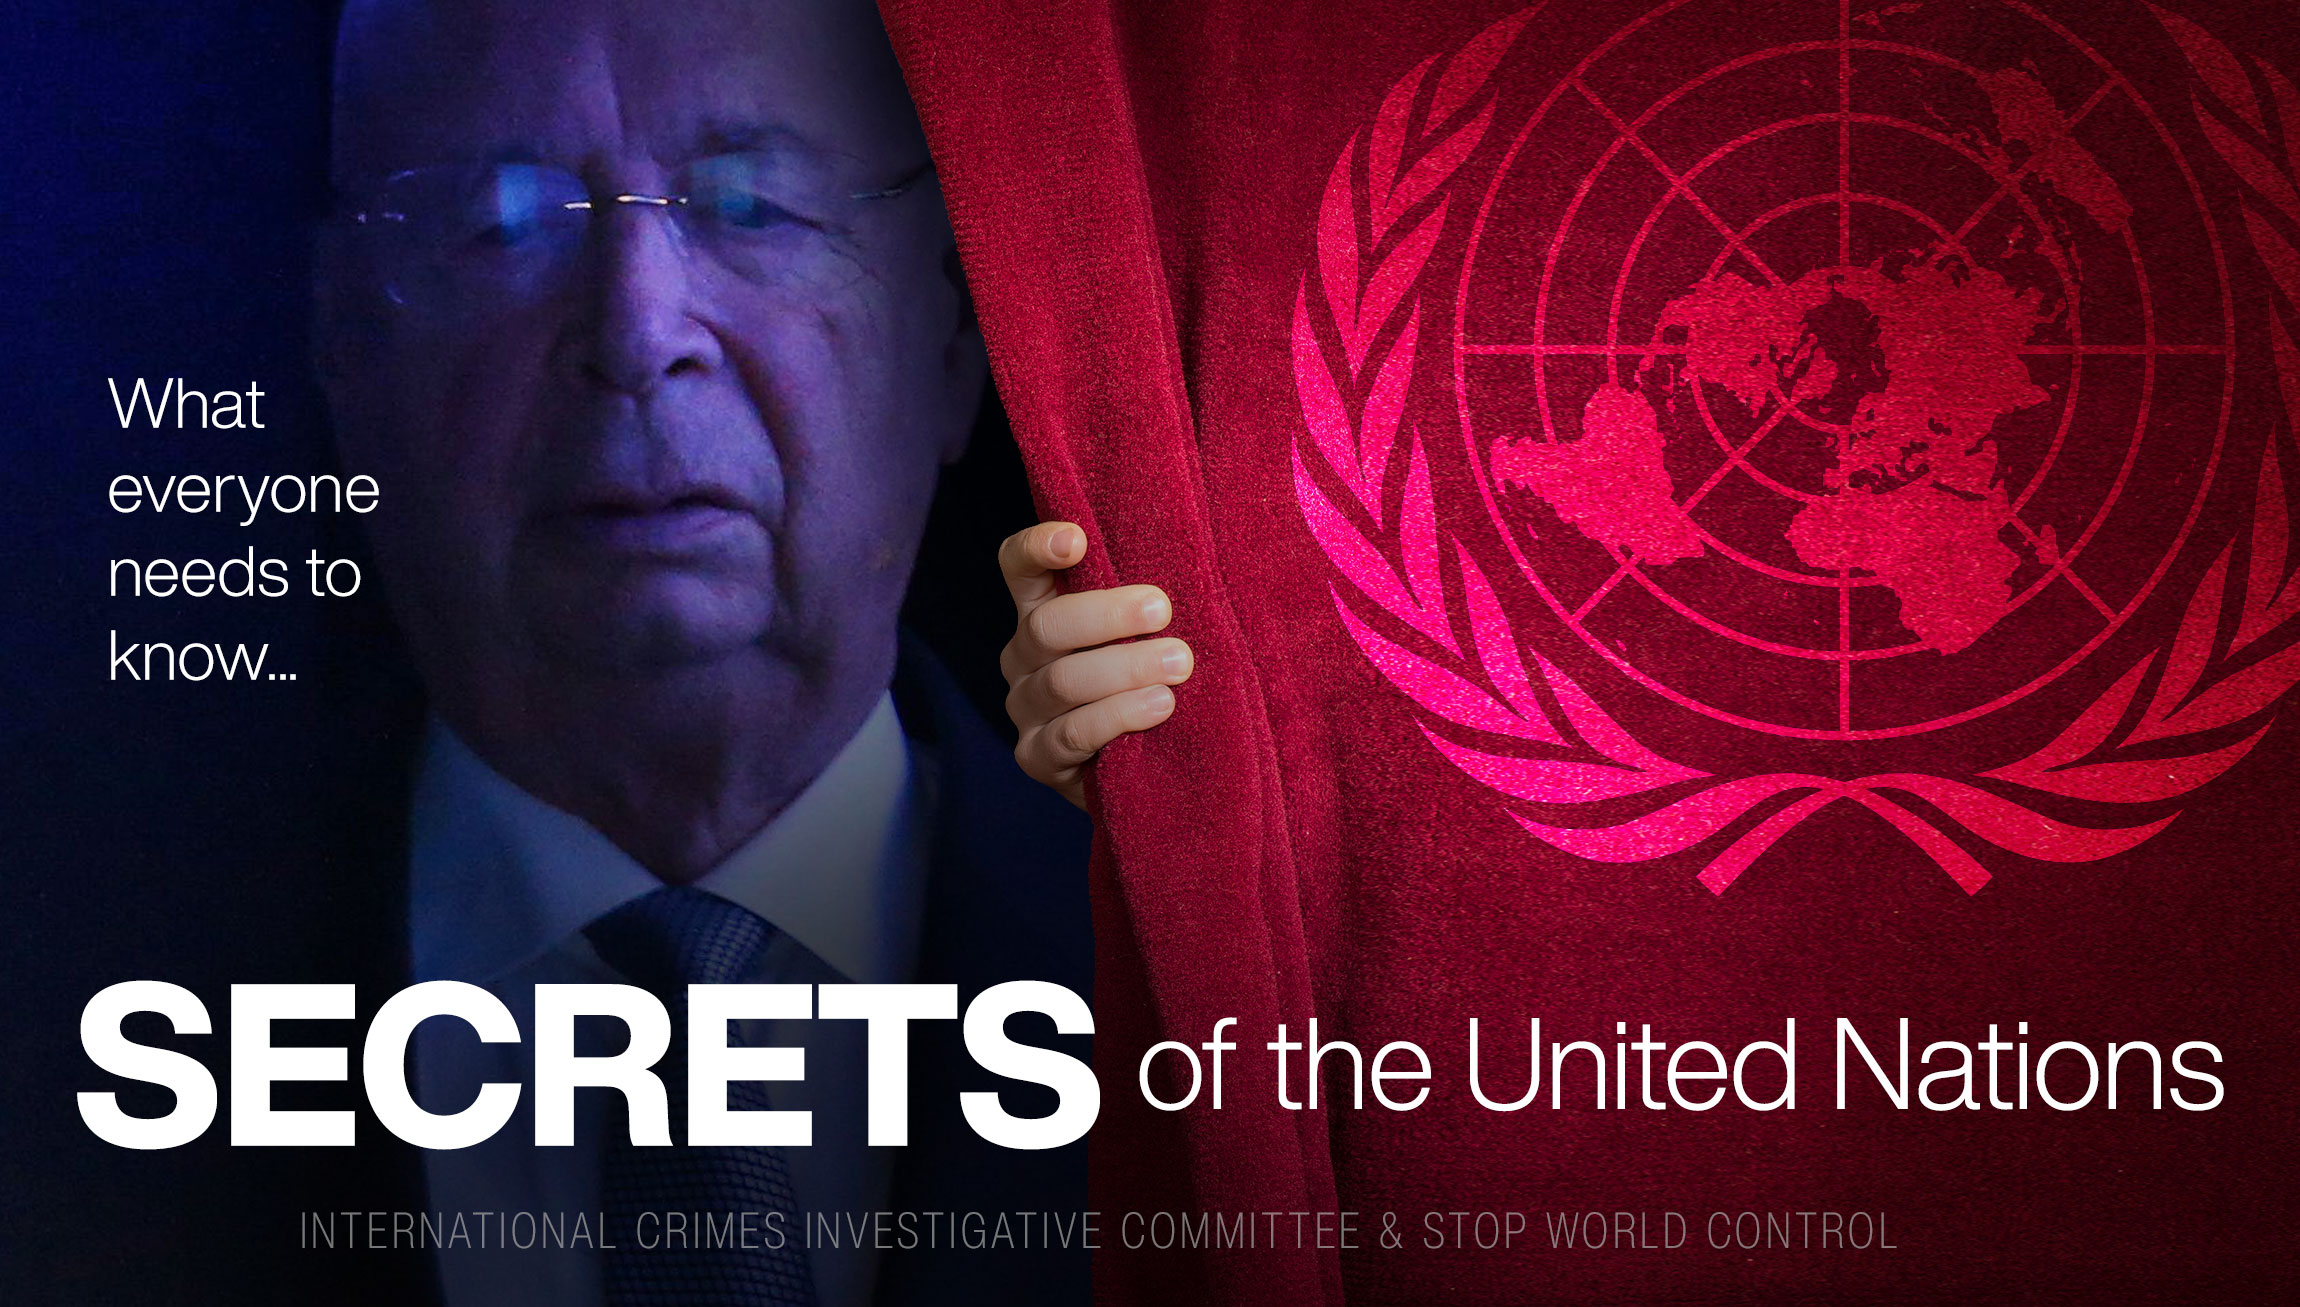 Saturday Jan. 28th dark secrets of the United Nations will be revealed